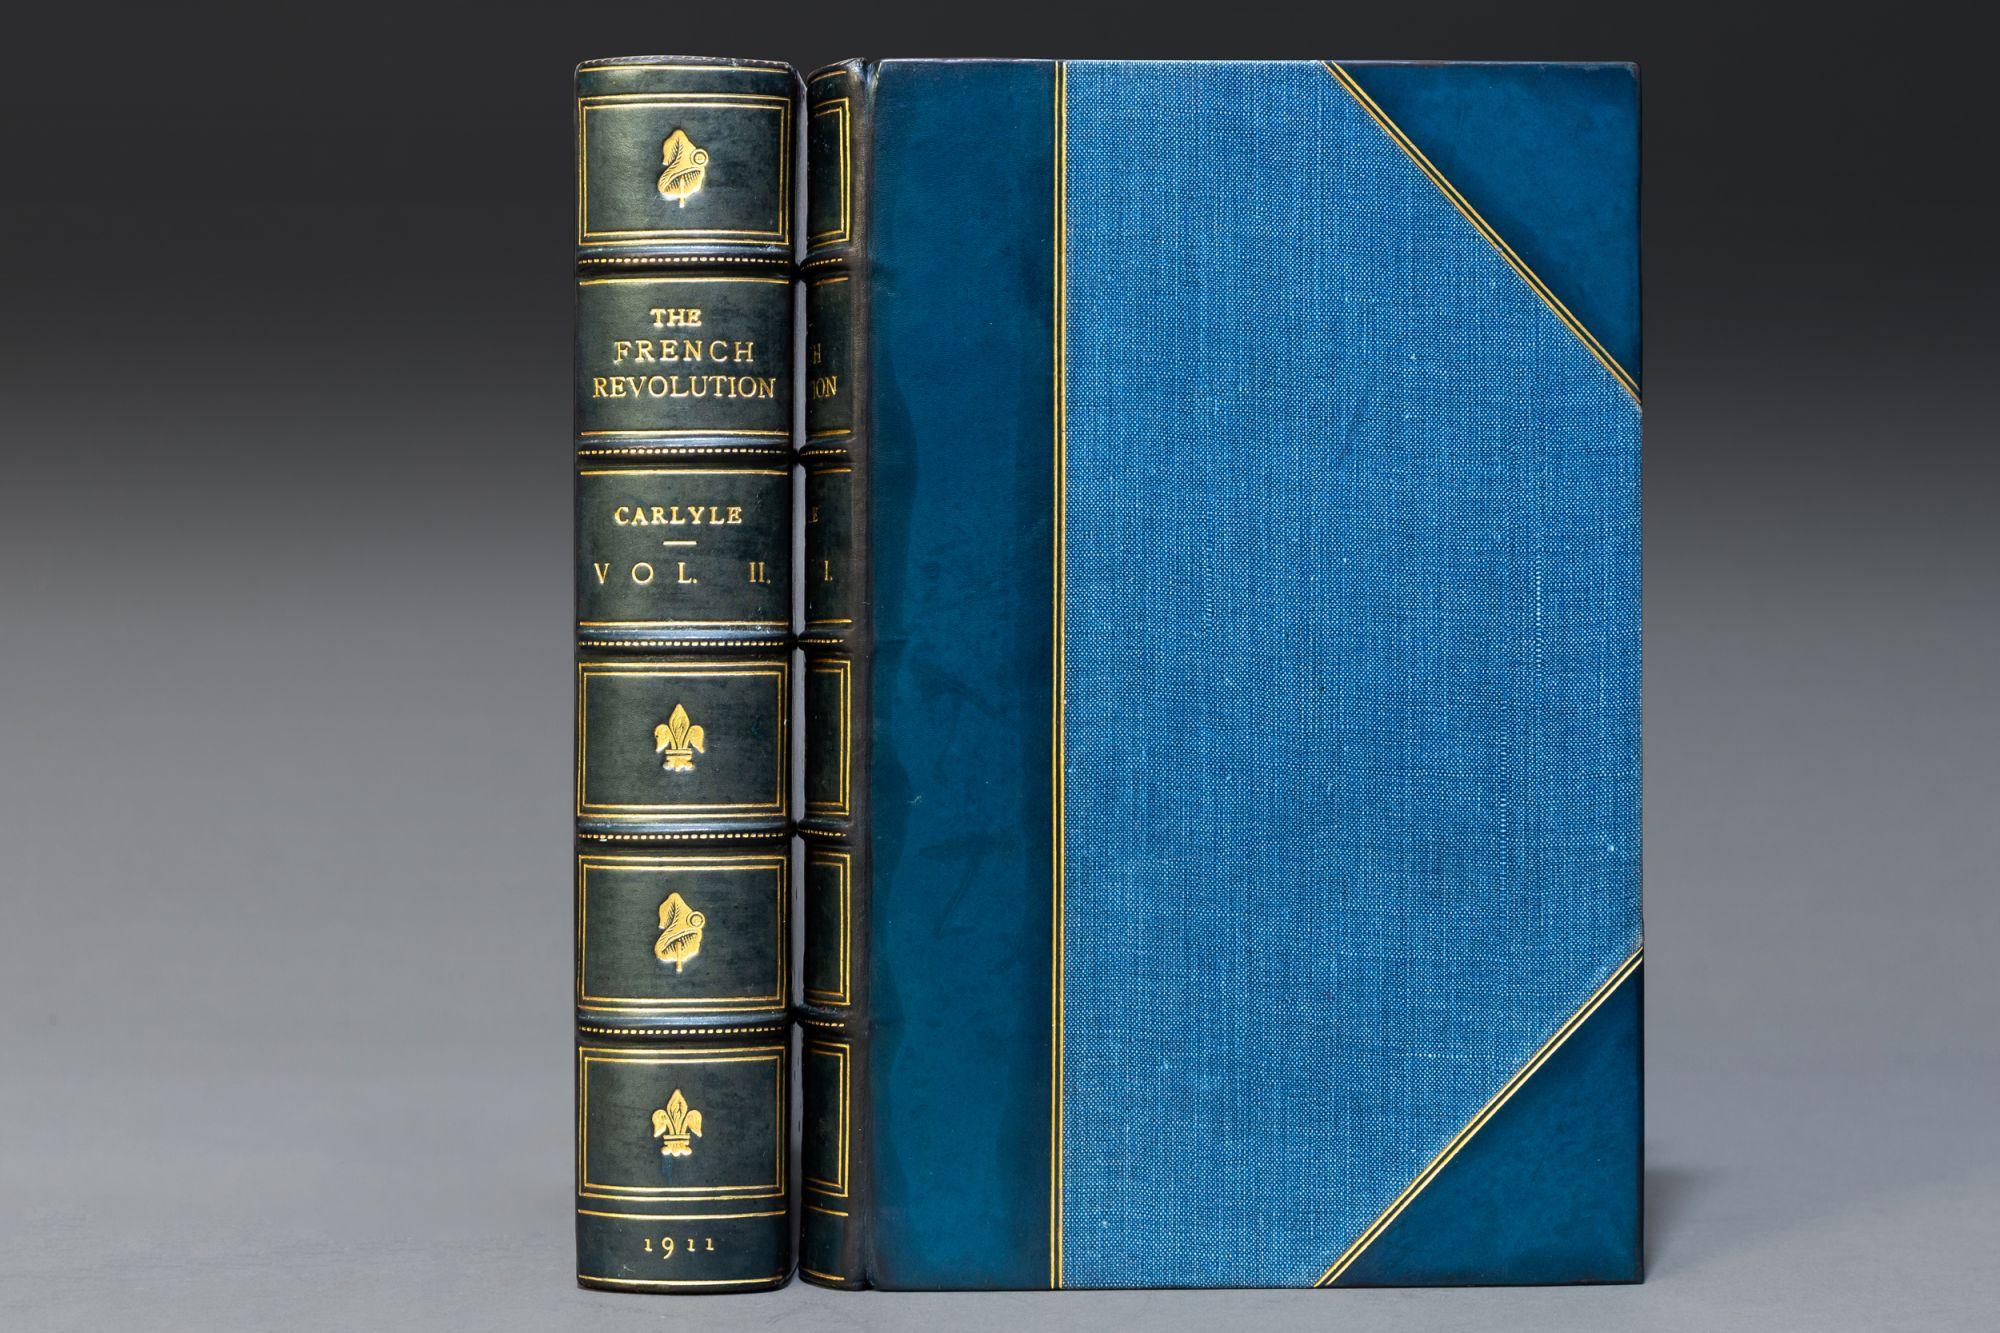 2 Volumes. Thomas Carlyle. The French Revolution. Bound in 3/4 blue calf by Morrell. Printed by Robert Maclehouse & Co. in Glasgow. Linen boards, marbled endpapers, gilt on covers & spines, raised bands, top edges gilt. 
Published: London: